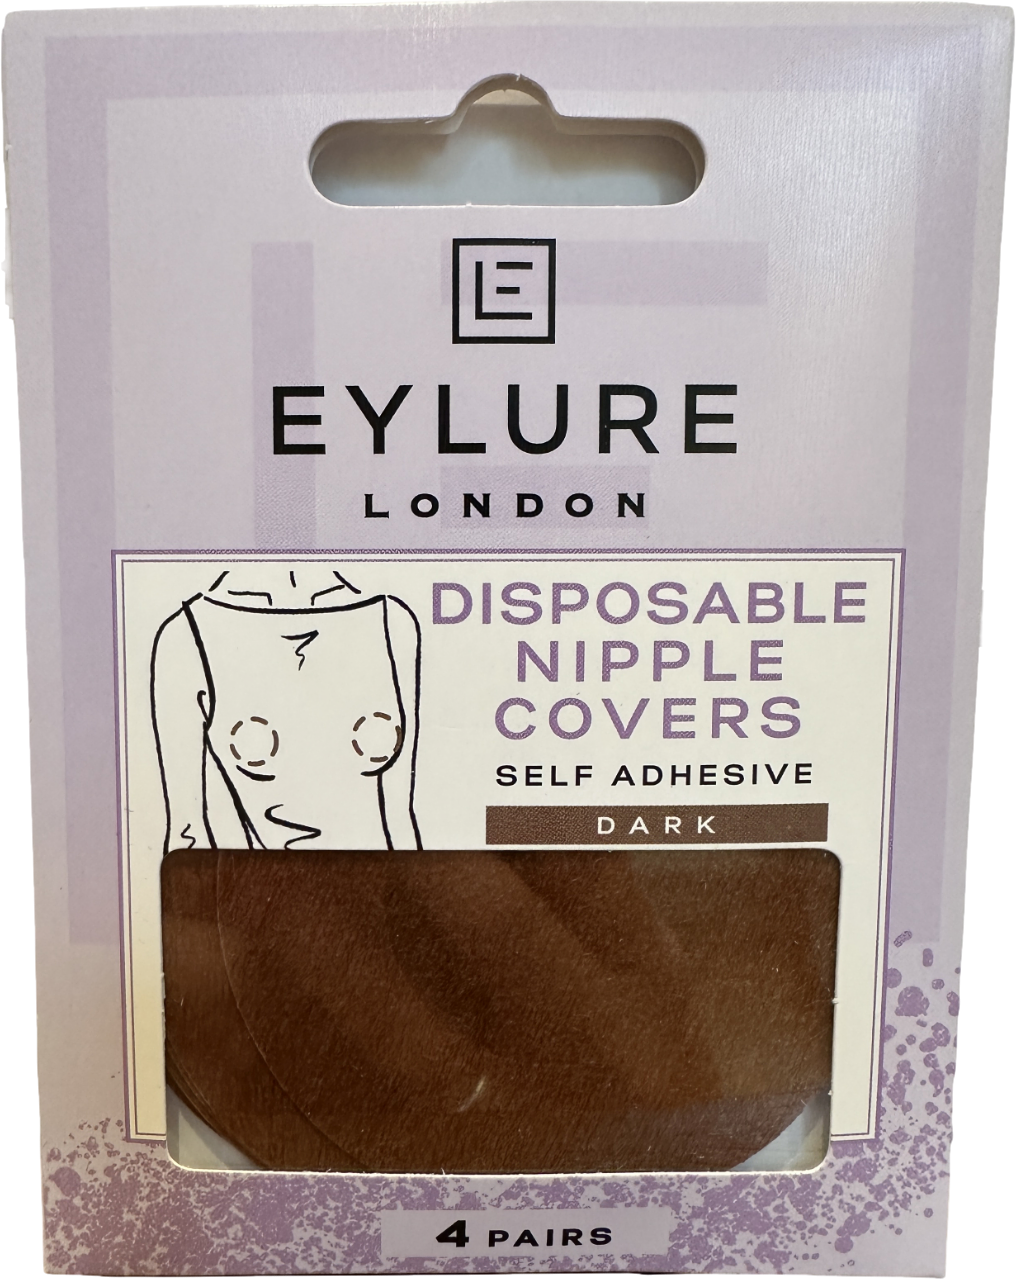 Eylure Disposable Nipple Covers Dark one size